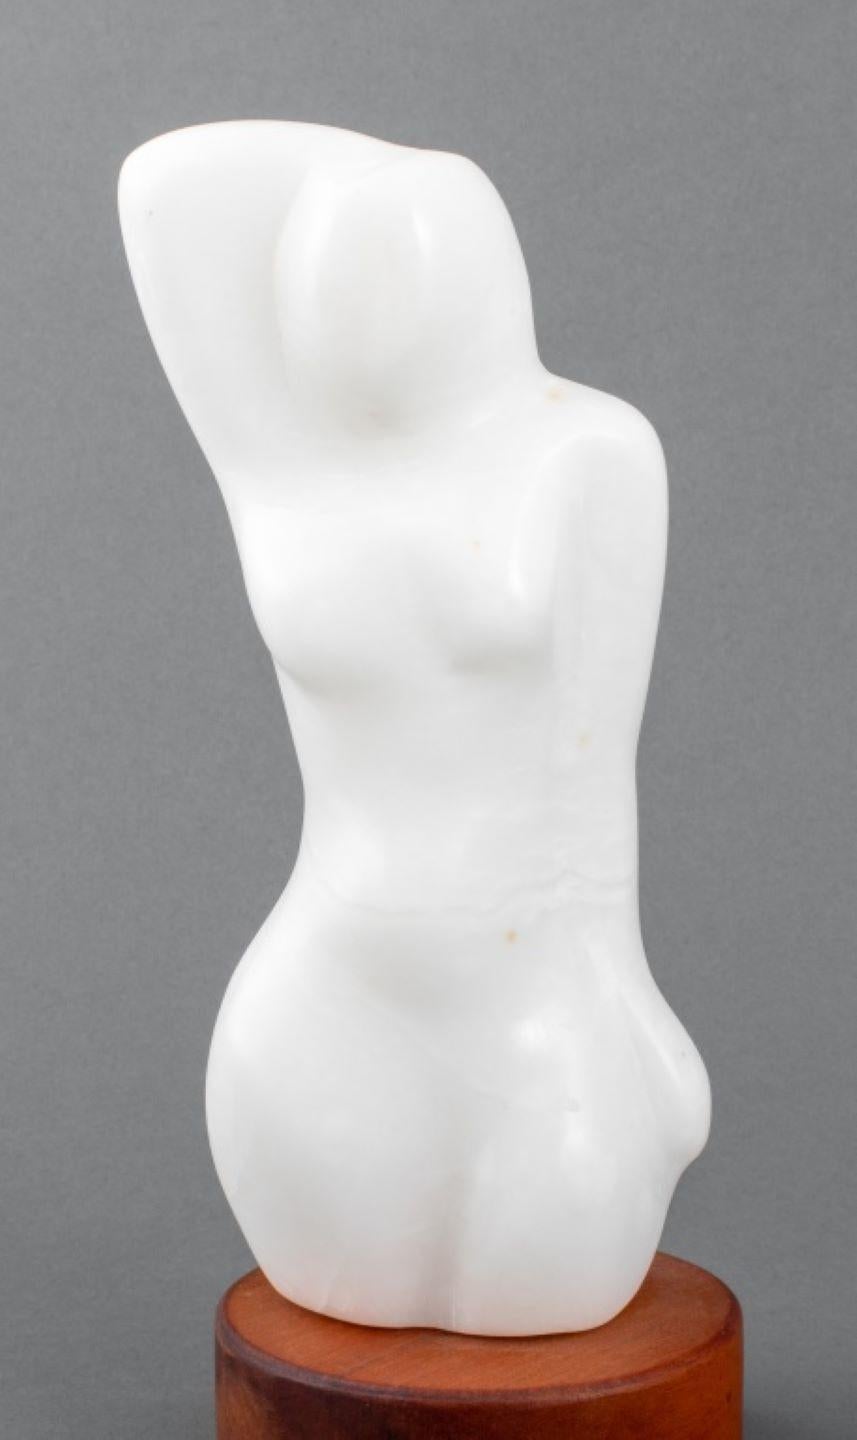 Joan Hyde Shapiro (American, XX-XXI) White Alabaster Stone Sculpture carved into a stylized nude female figure, signed to reverse, mounted on a wooden base. Overall: 10.25